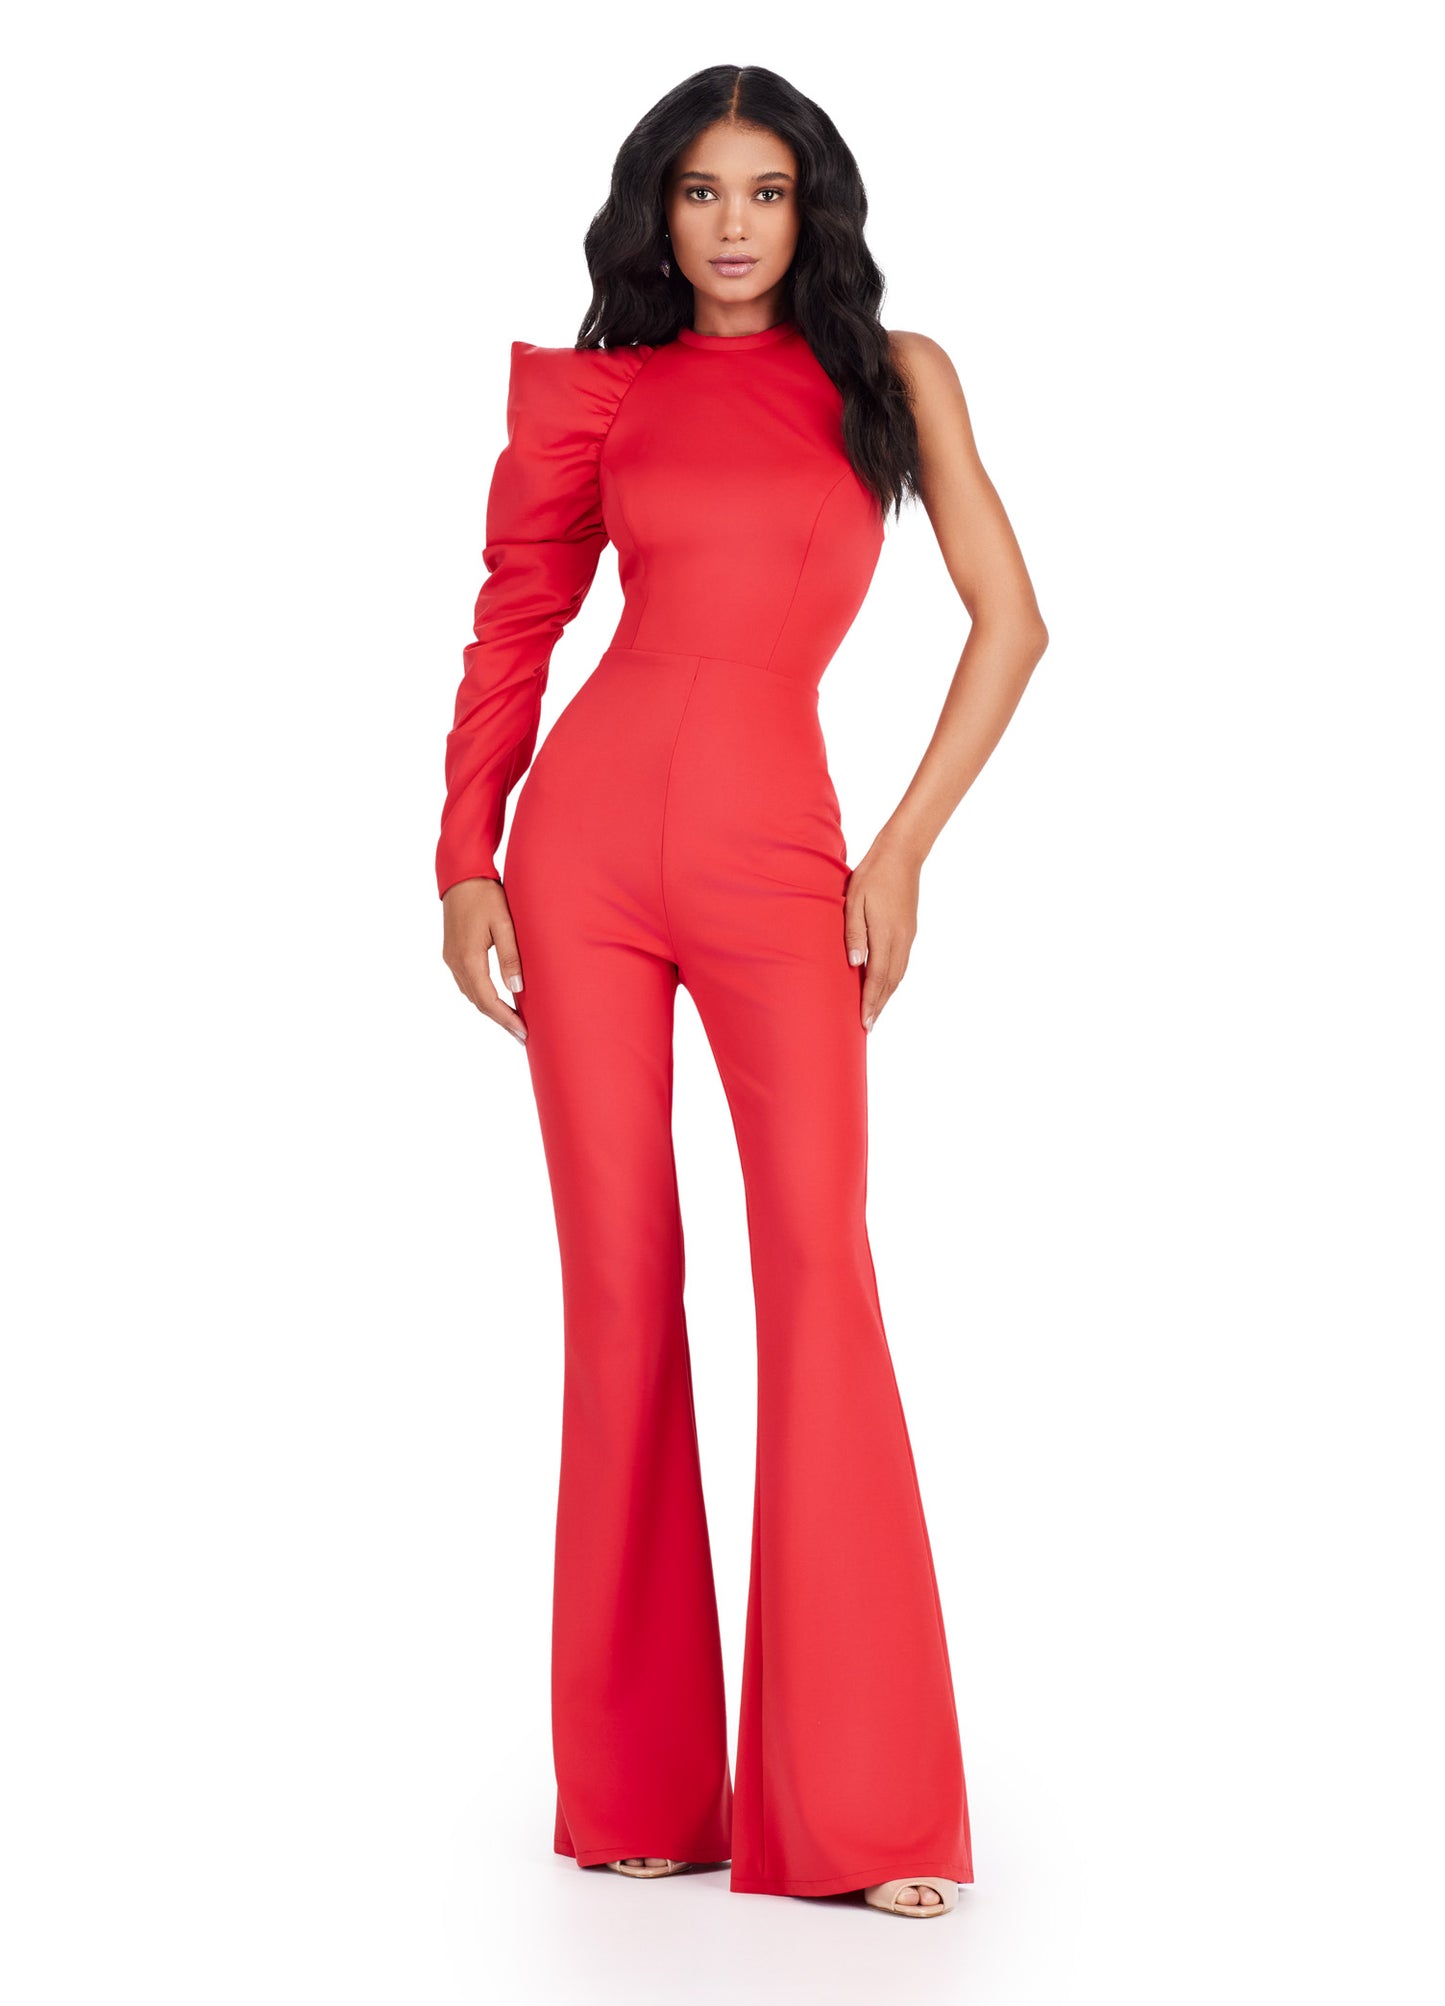 Effortlessly elegant, the Ashley Lauren 11531 Prom One Shoulder Jumpsuit exudes sophistication with its scuba material and one-shoulder design. The added puff sleeve detail adds a touch of drama to this formal piece. Embrace a modern and stylish look with this jumpsuit for any special occasion. Be remembered in this scuba one shoulder jumpsuit with exaggerated puff sleeve.